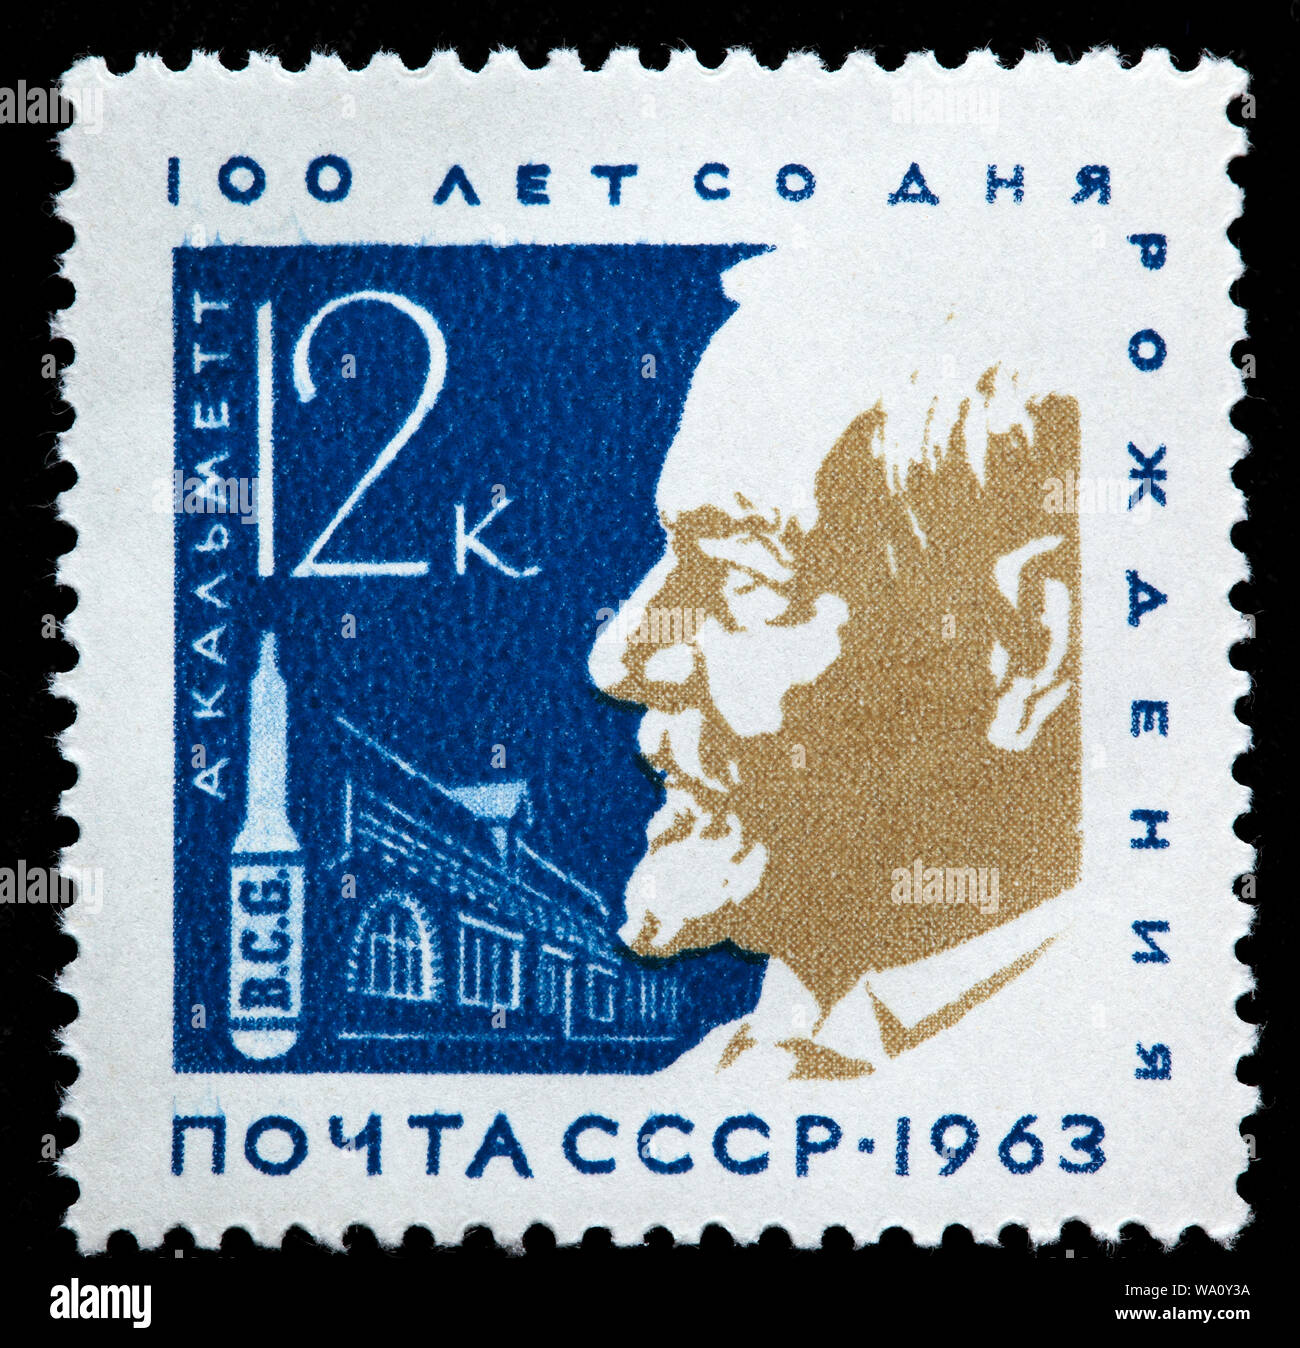 Albert Calmette (1863-1933), French physician, bacteriologist, immunologist, 75th Anniversary of Pasteur Institute in Paris, postage stamp, Russia, US Stock Photo